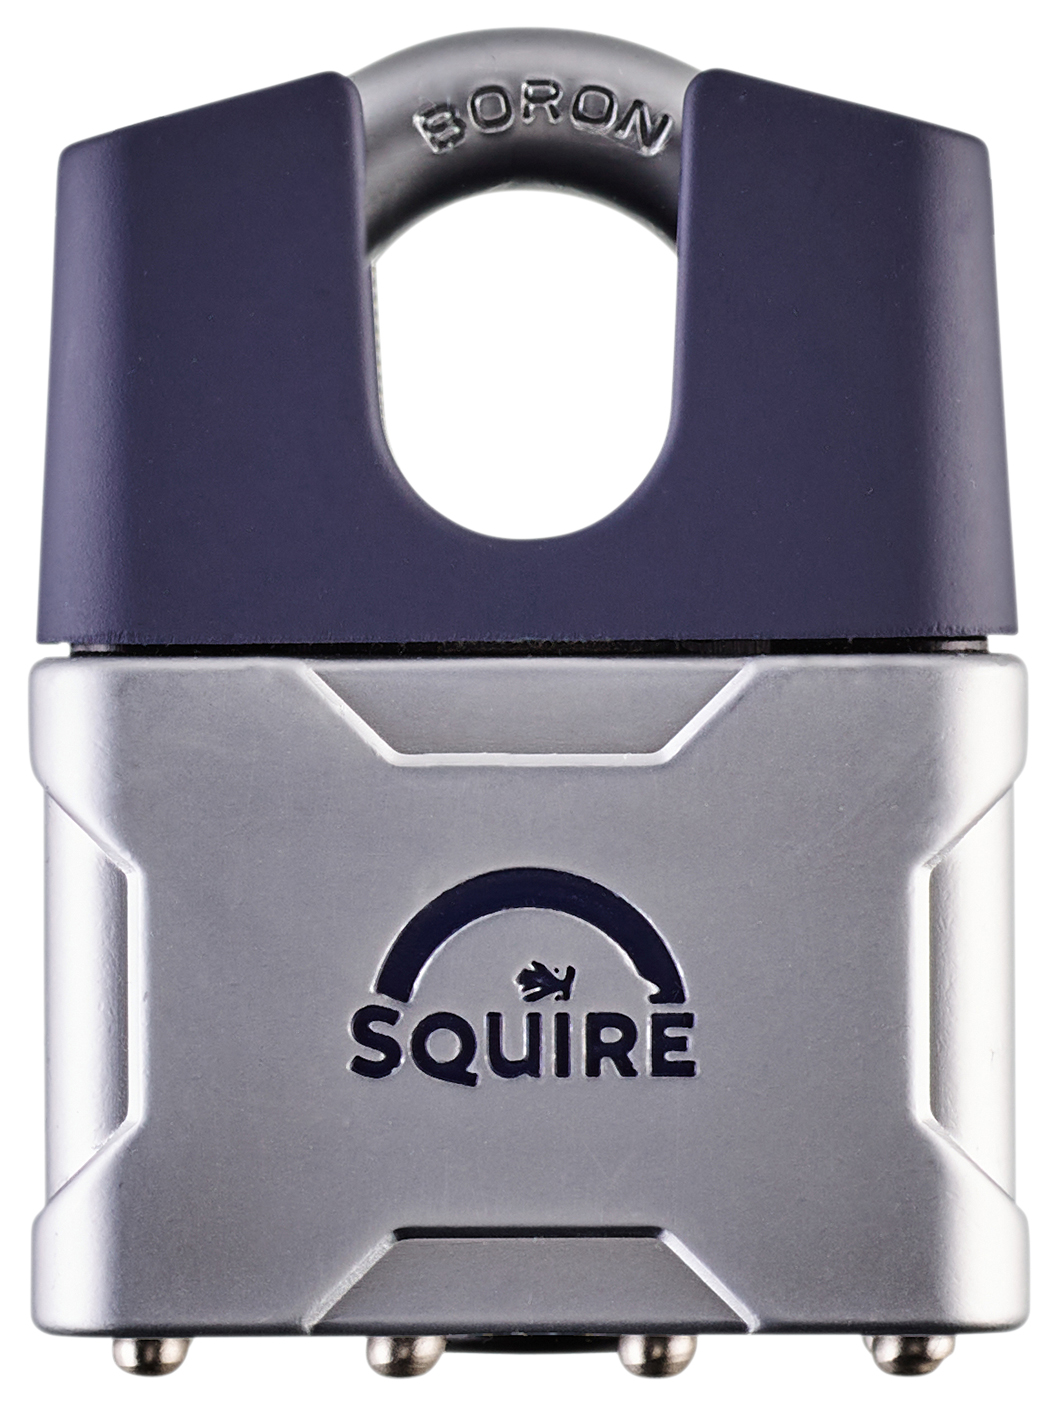 Image of Squire Die Cast Body Cover with Closed Boron Shackle Padlock - 50mm